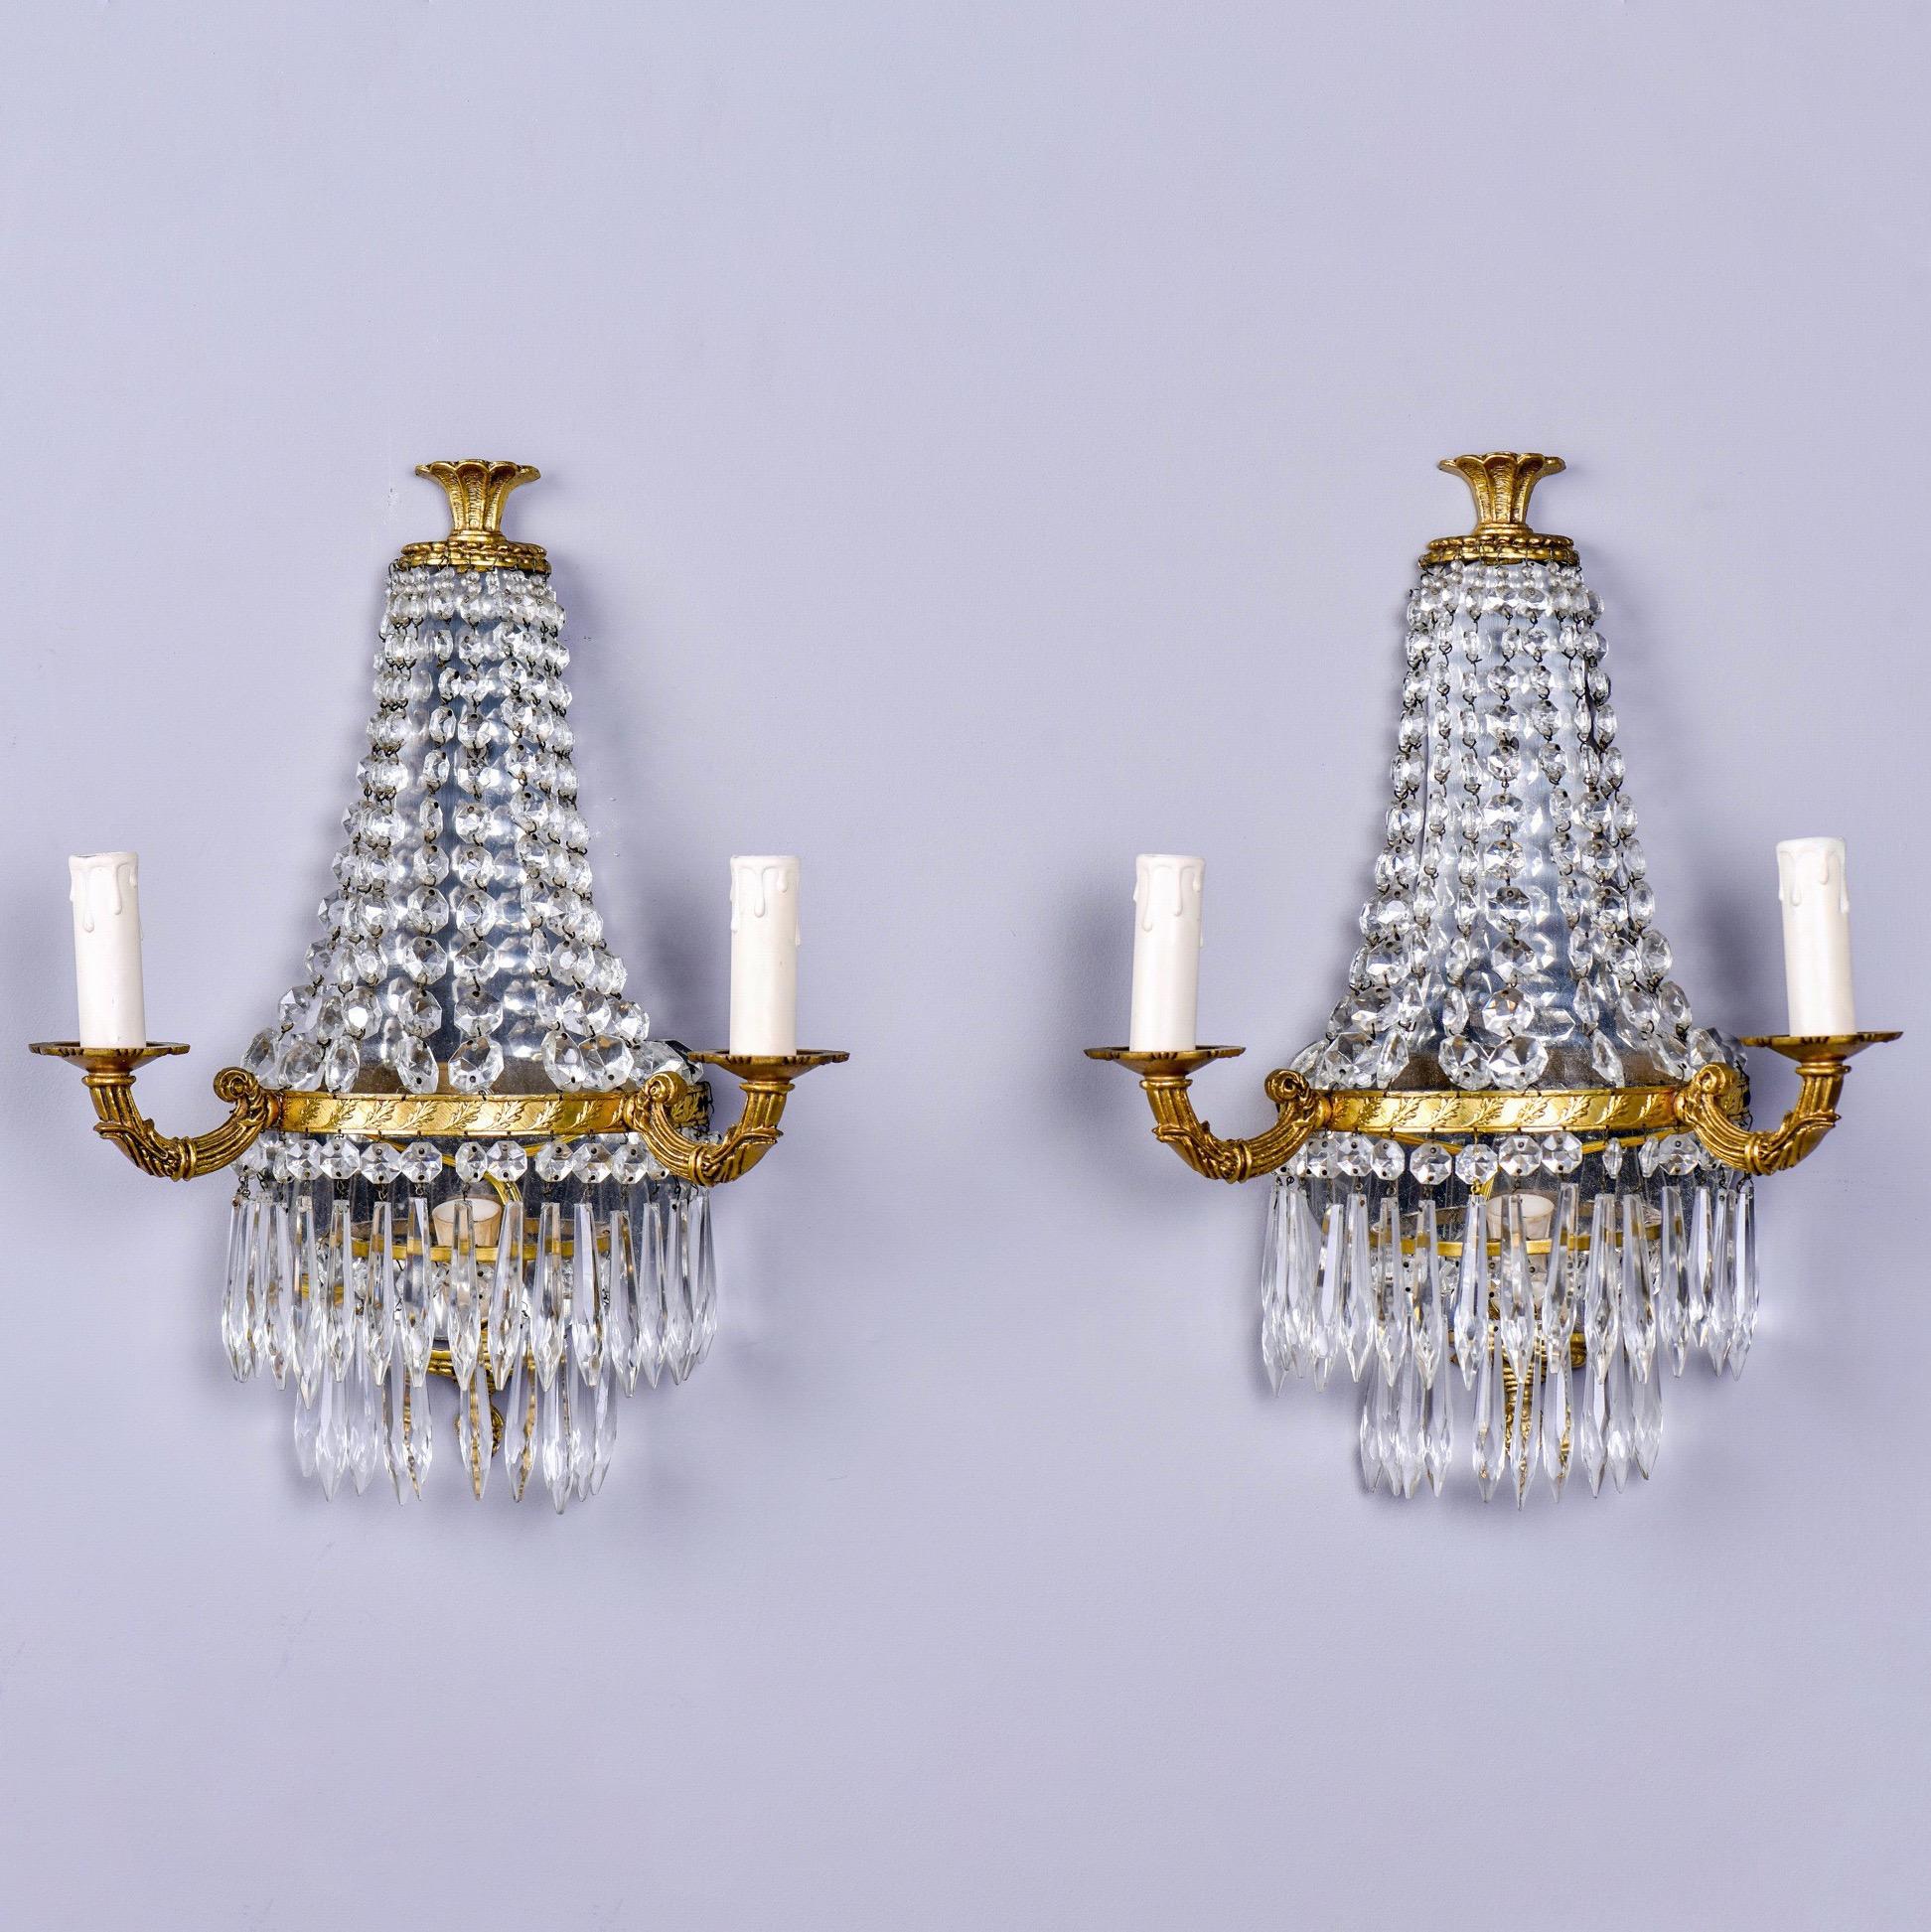 Found in England, this pair of circa 1940s two-light sconces feature a brass frame draped with crystal beading on the top level and two tiers of crystal pendants on the bottom. Unknown maker. New wiring for US electrical standards. Sold and priced